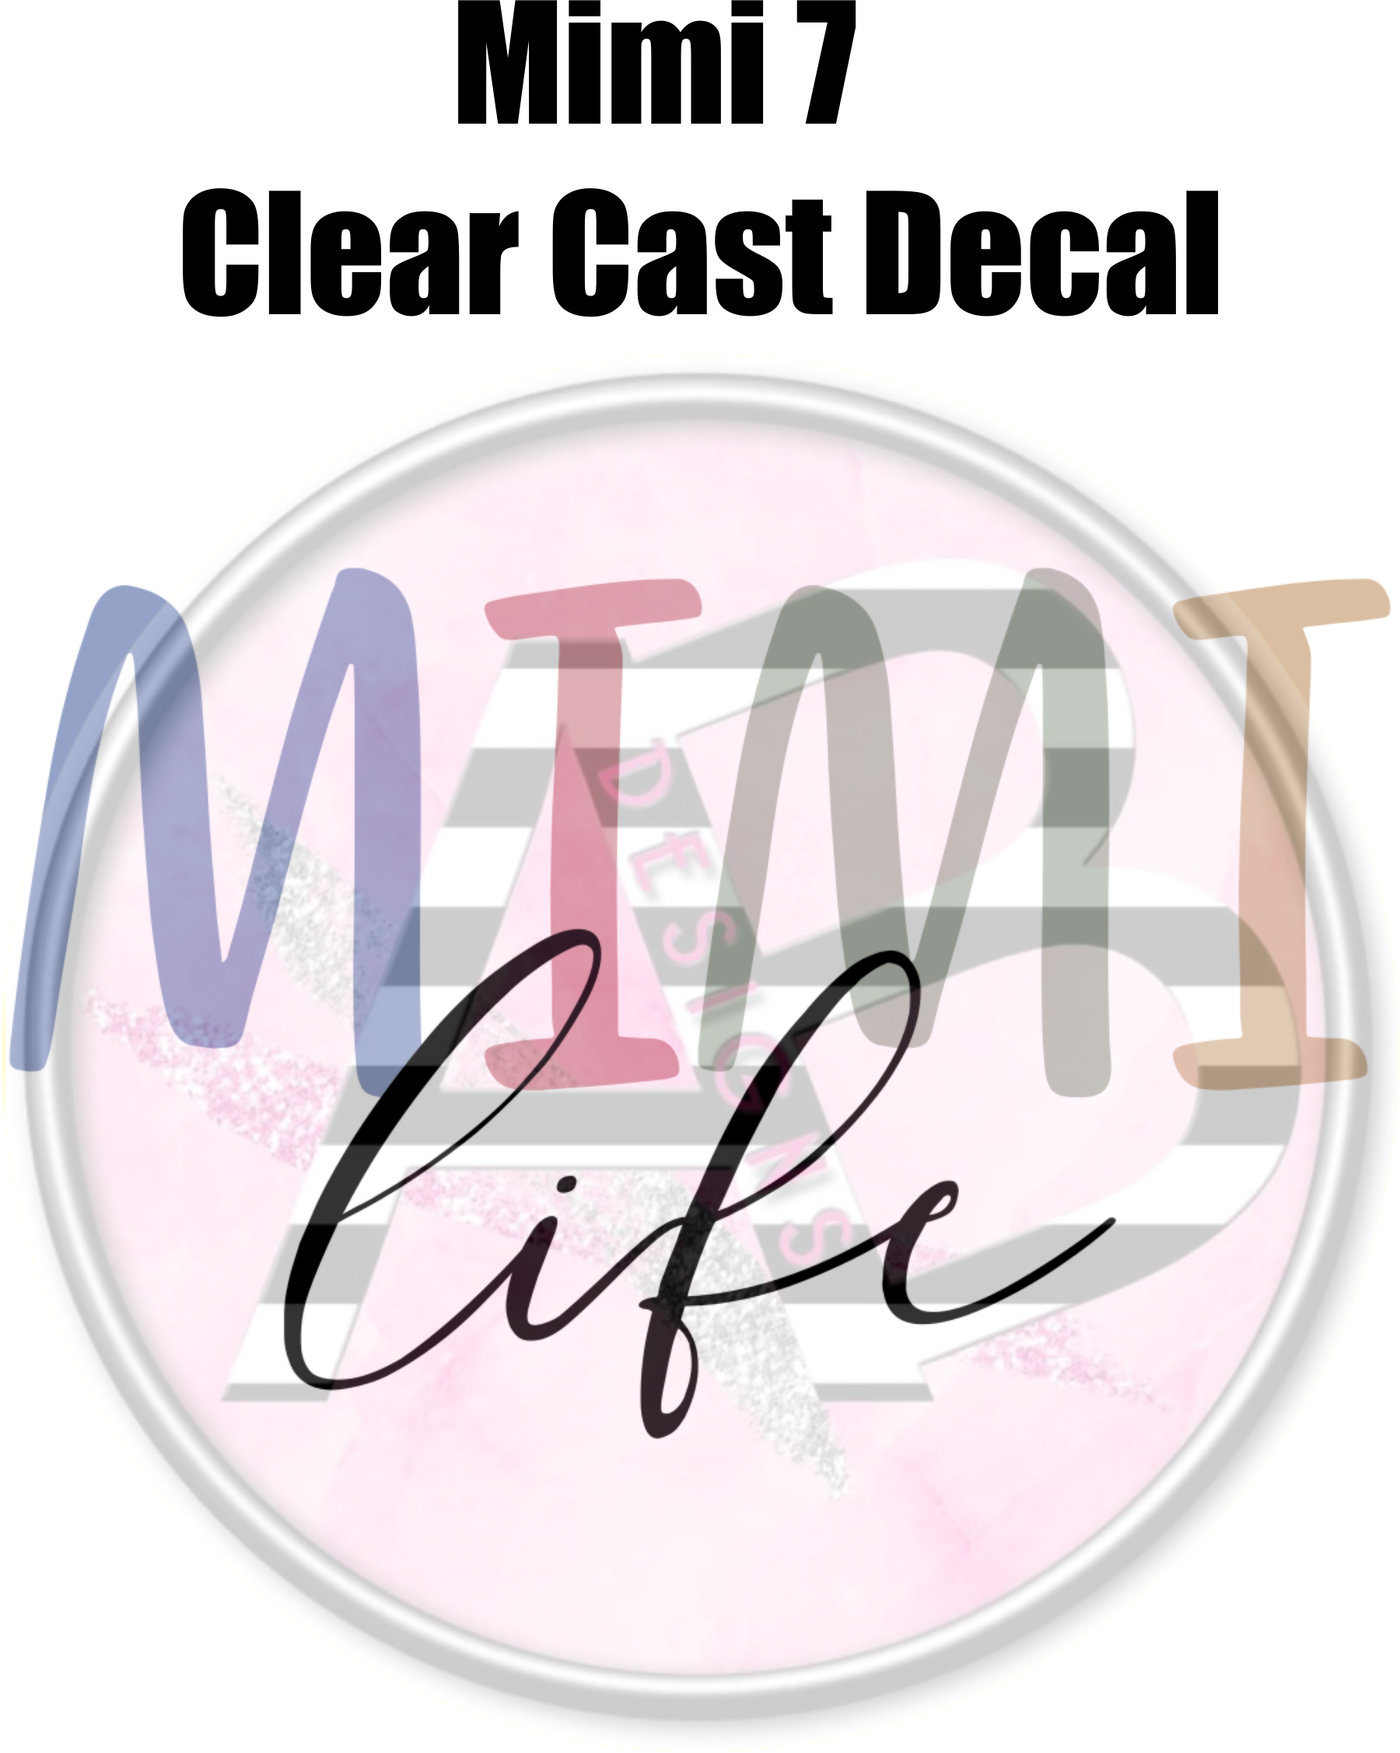 Mimi 7 - Clear Cast Decal